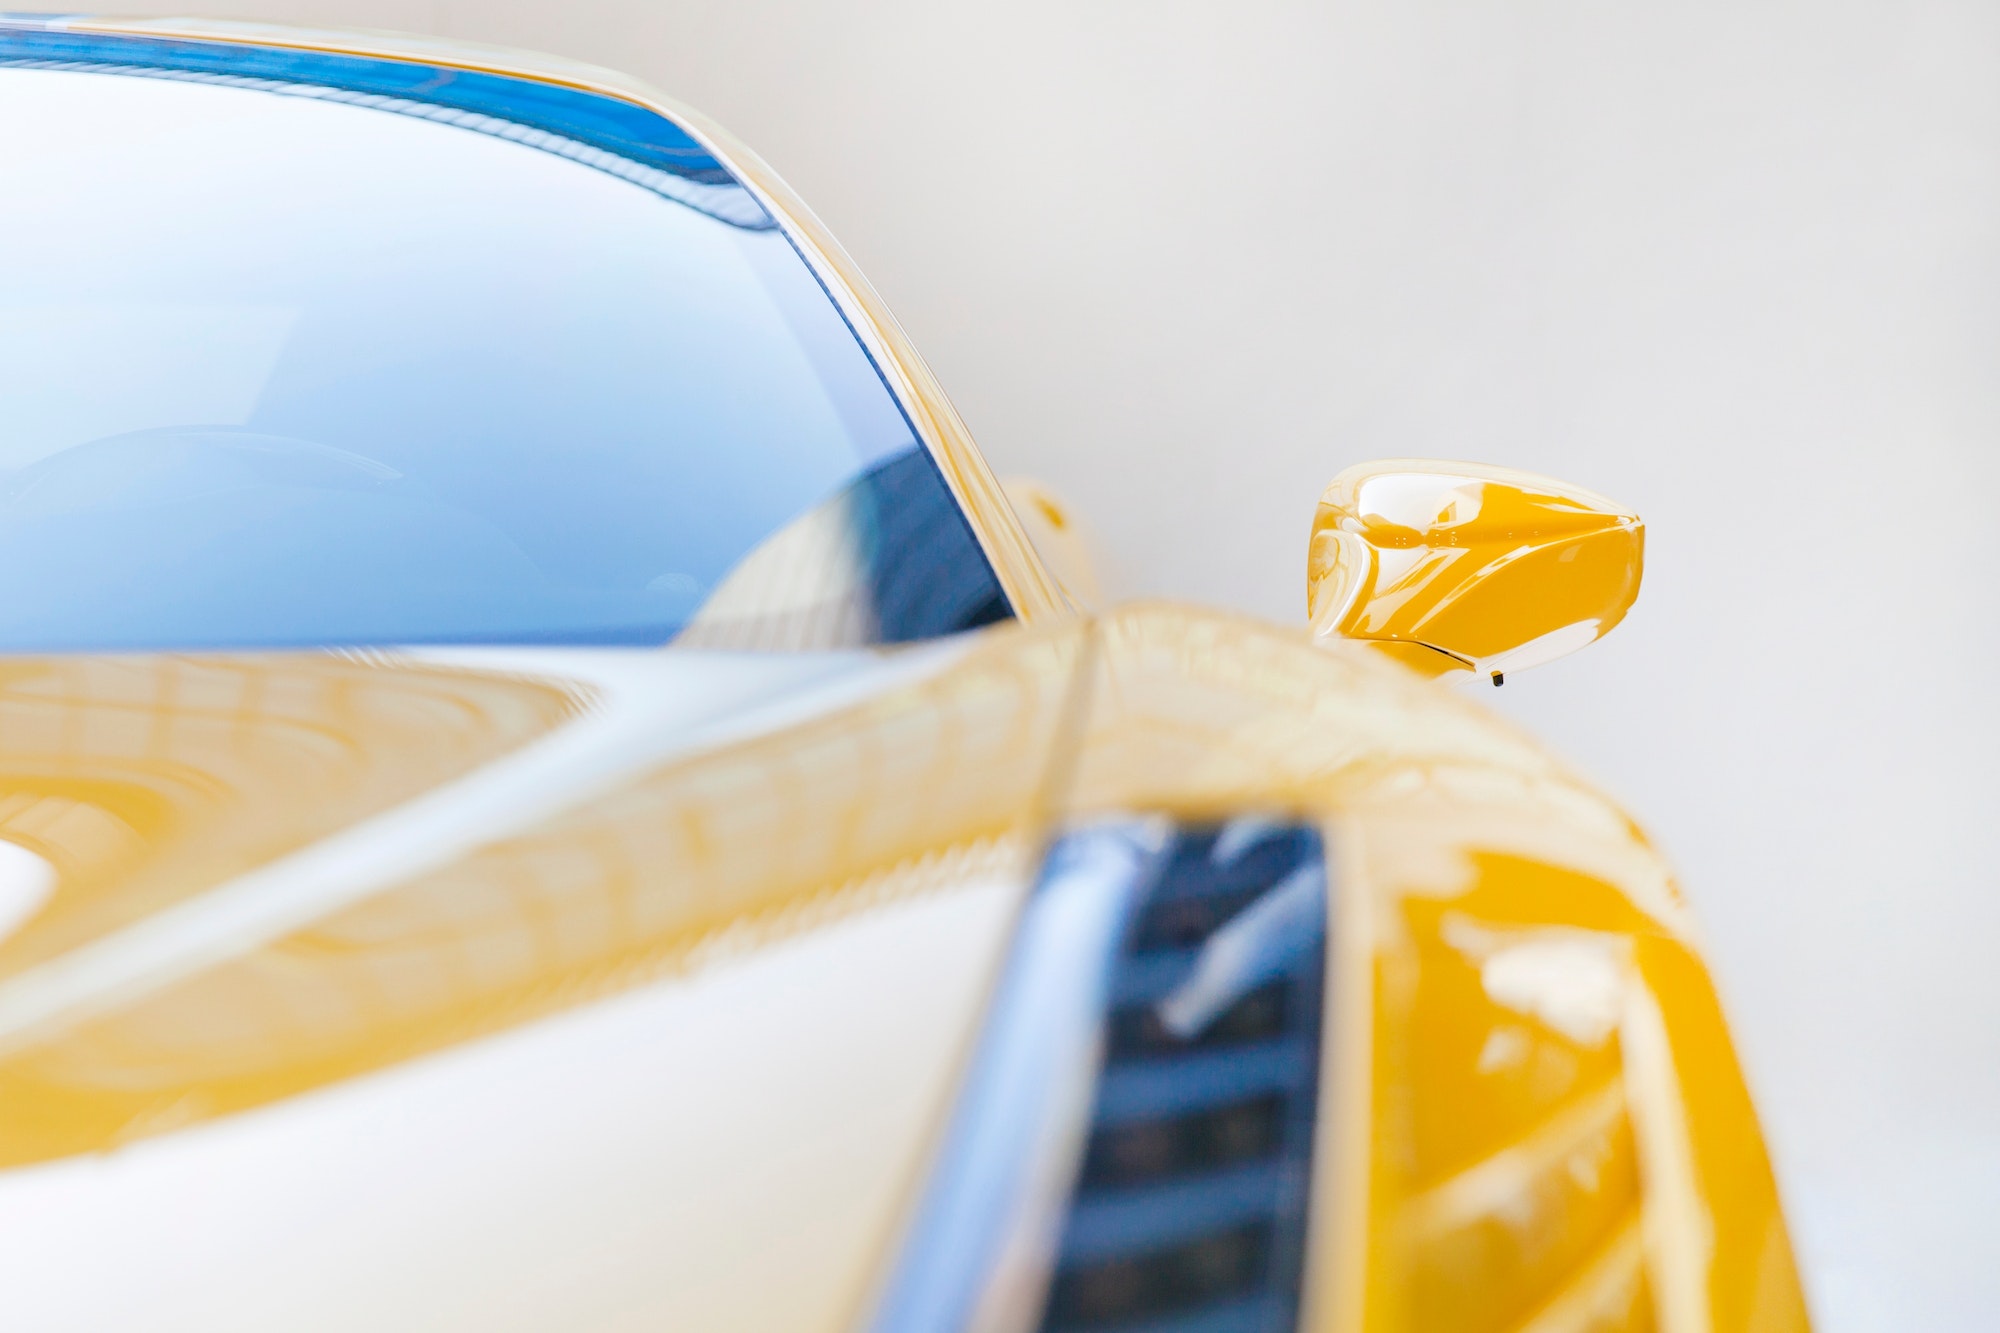 Details of luxury yellow car